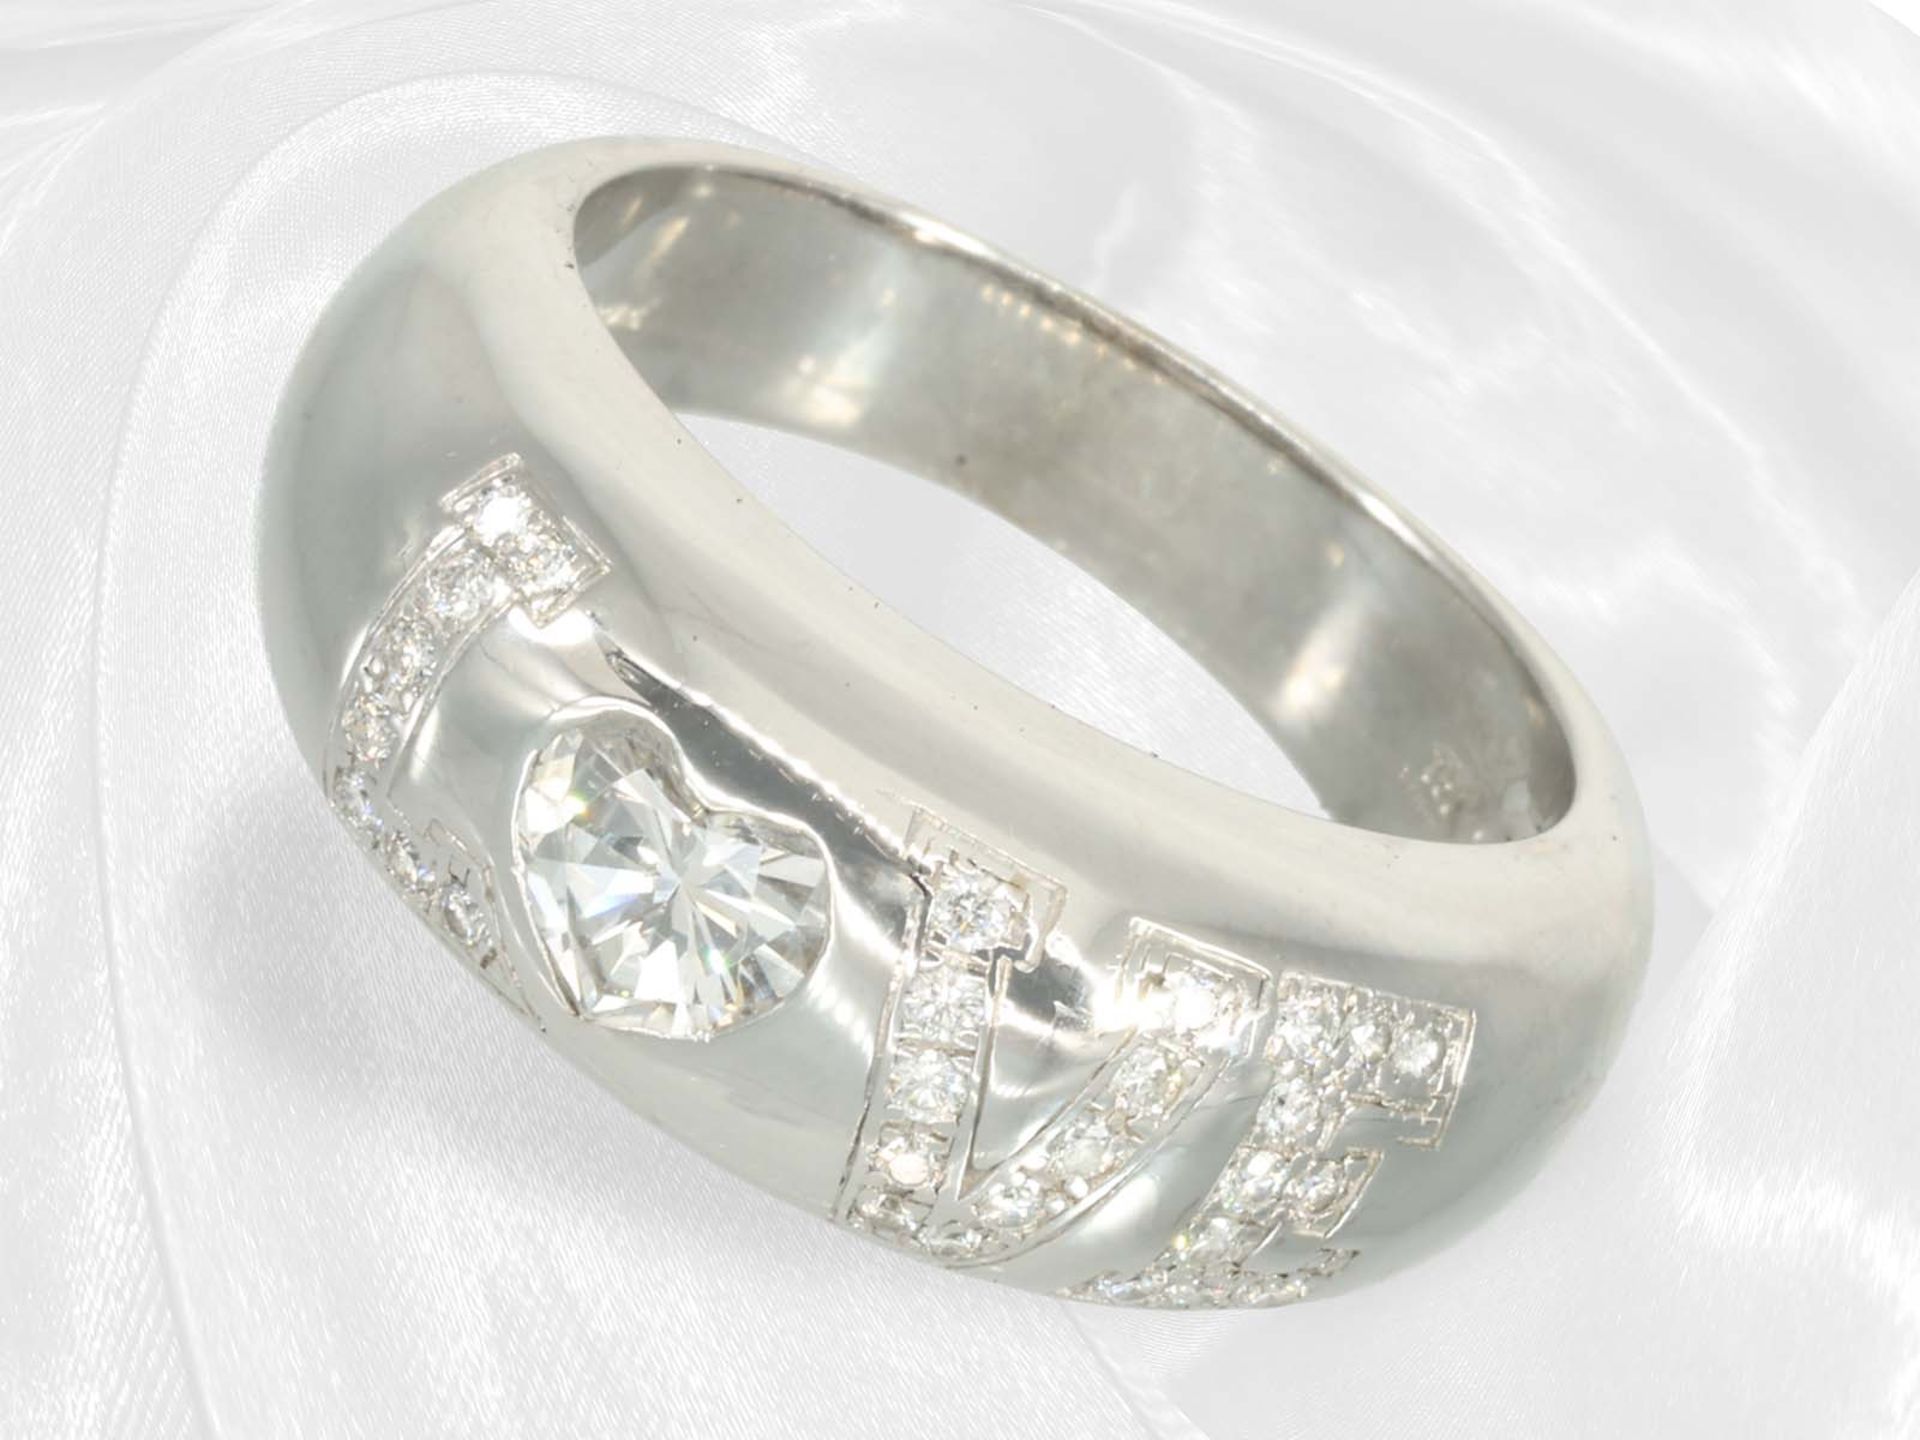 High quality designer white gold ring "Love" with brilliant-cut diamonds, signed Chopard, including 